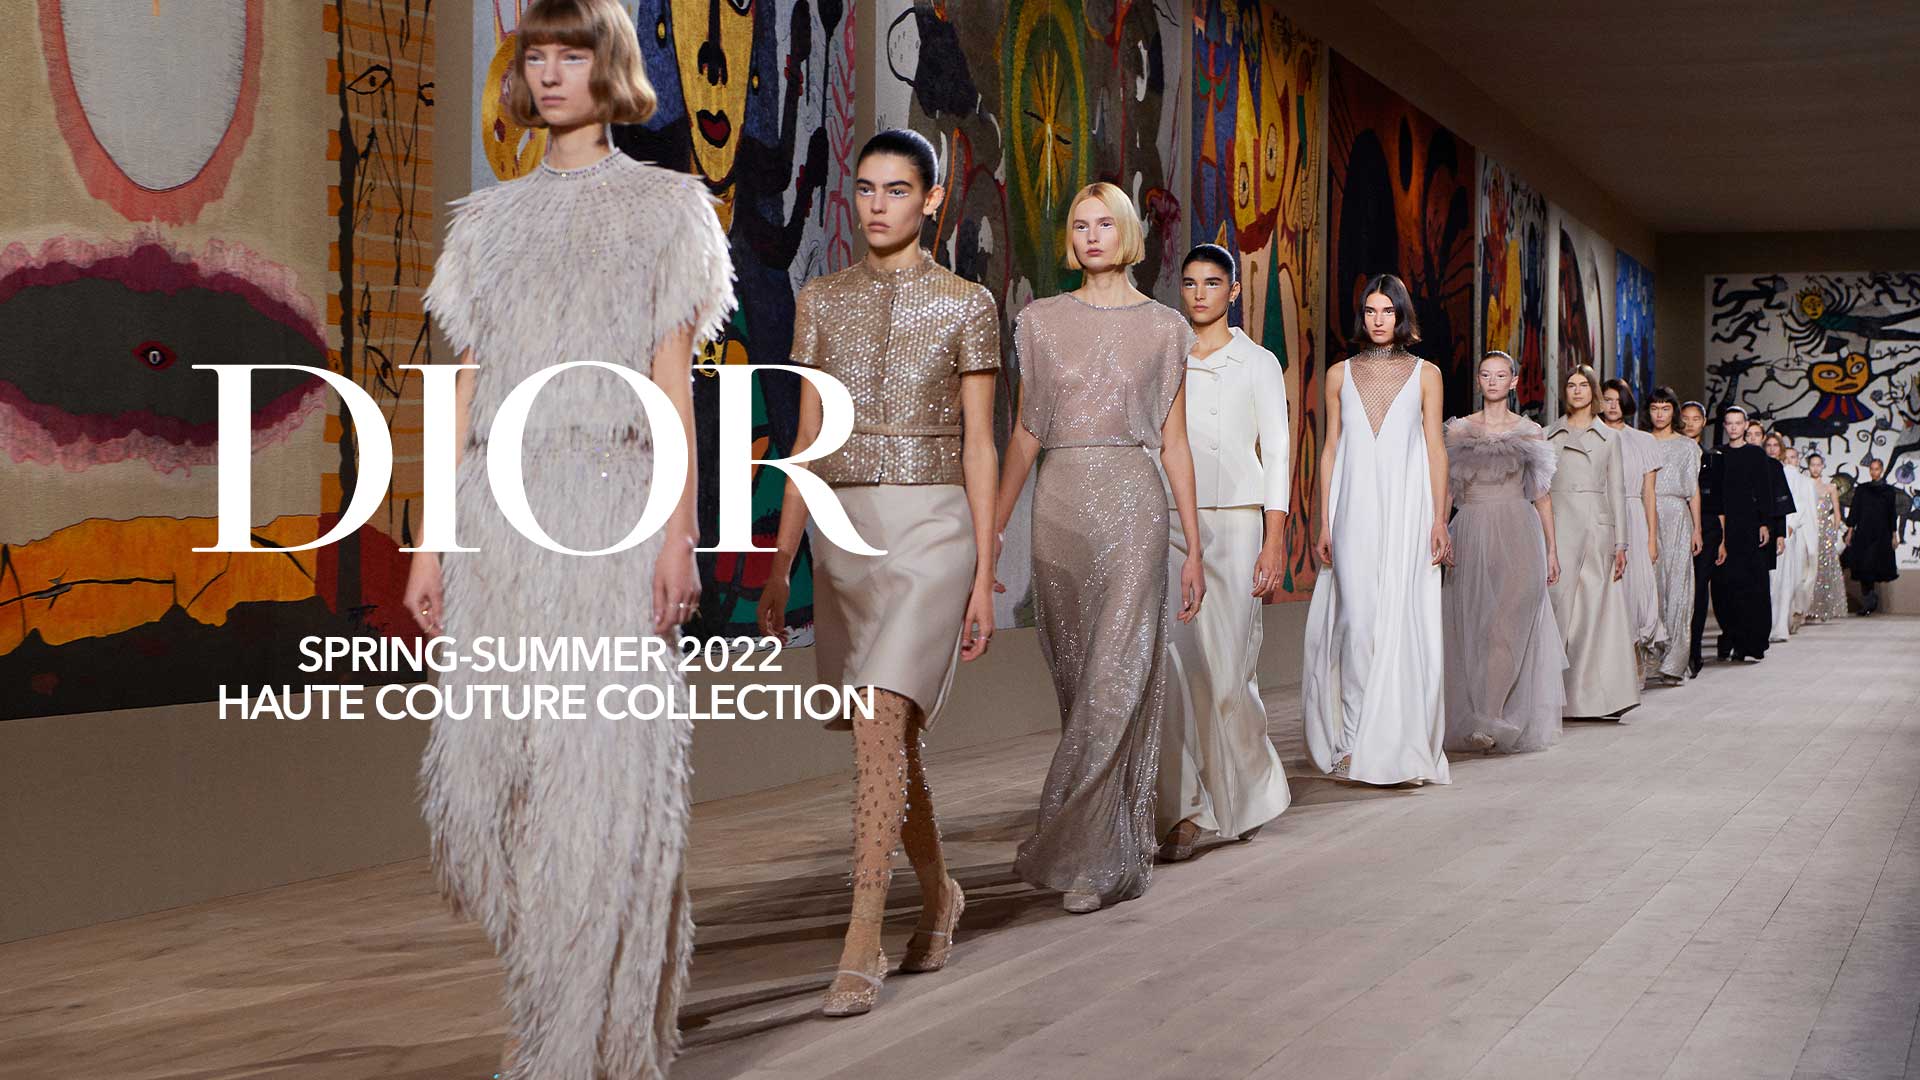 Preview - Dior Spring-Summer 2022 Haute Couture Collection